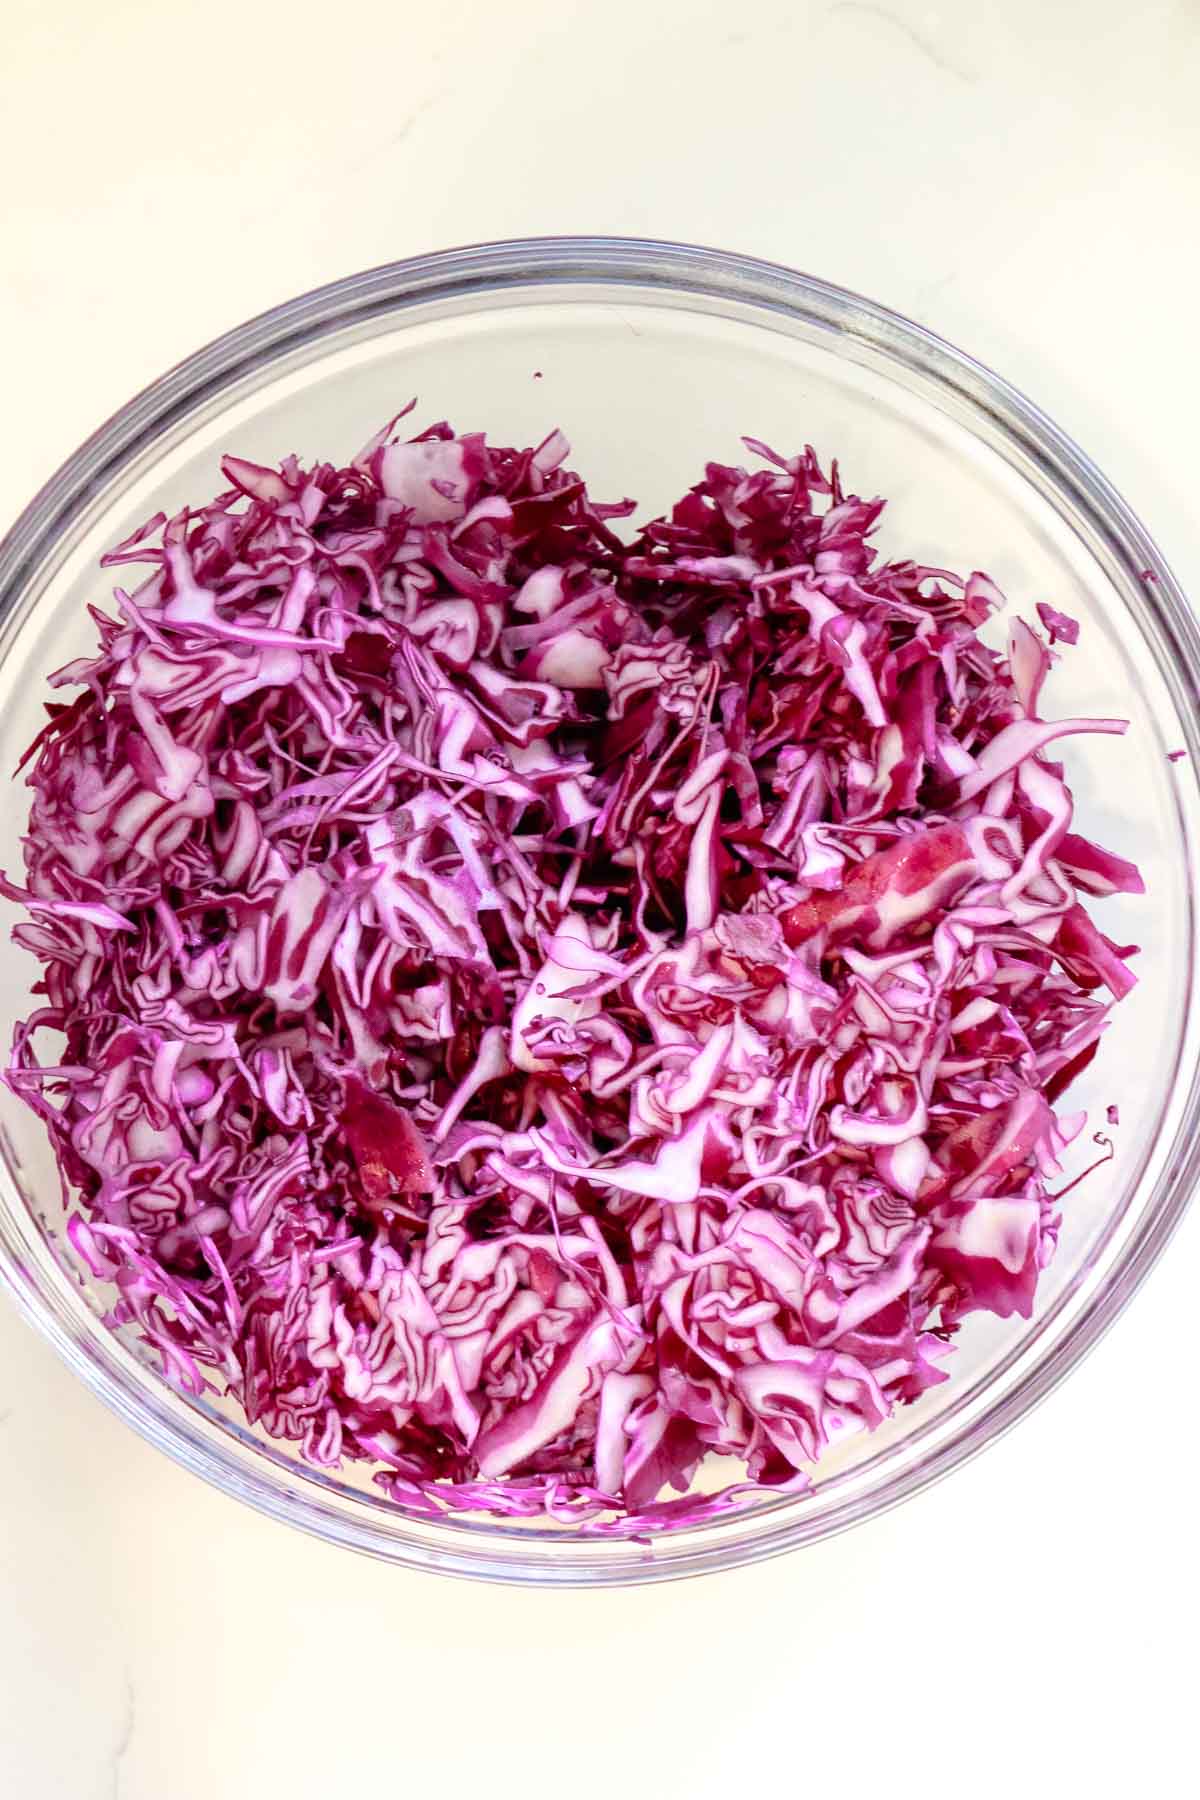 shredded red cabbage in a large glass bowl